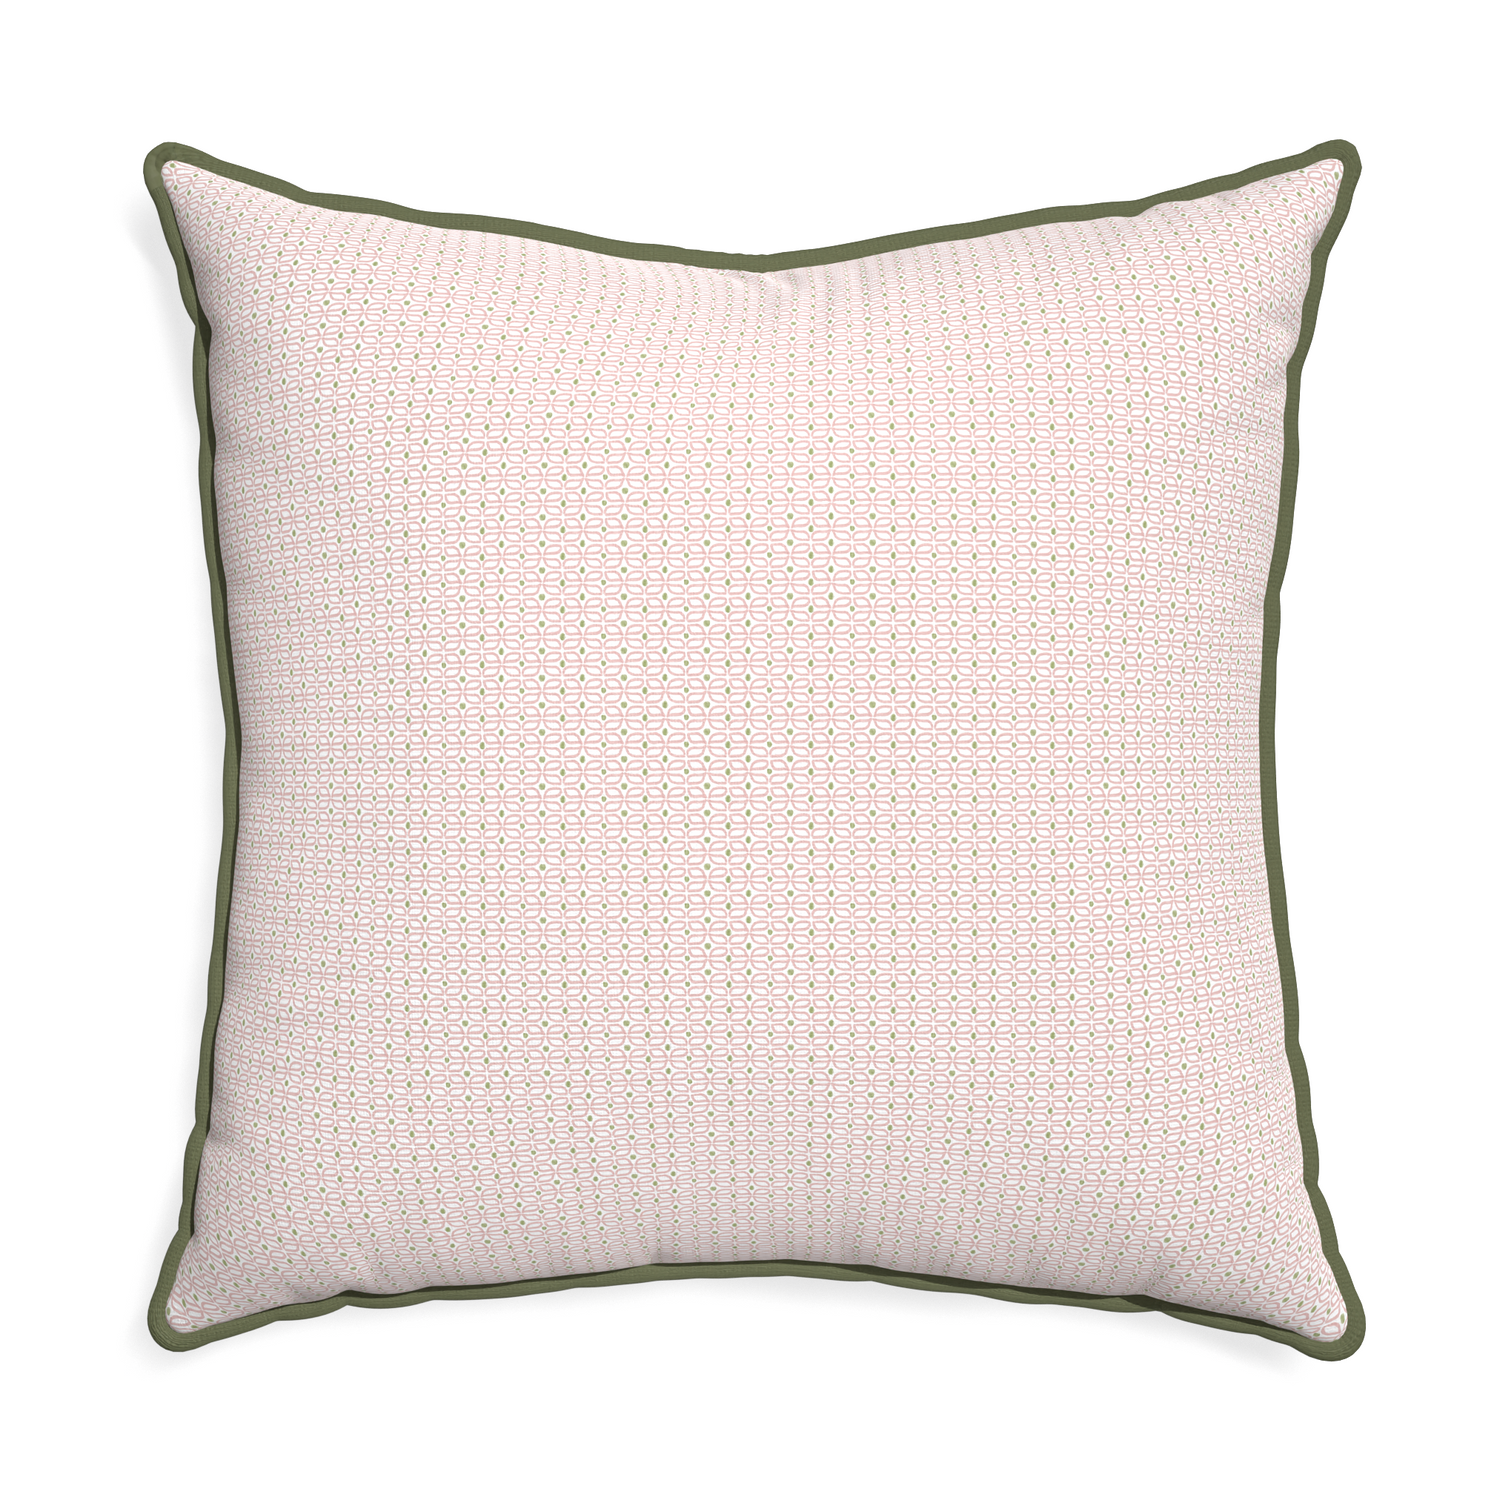 Euro-sham loomi pink custom pillow with f piping on white background